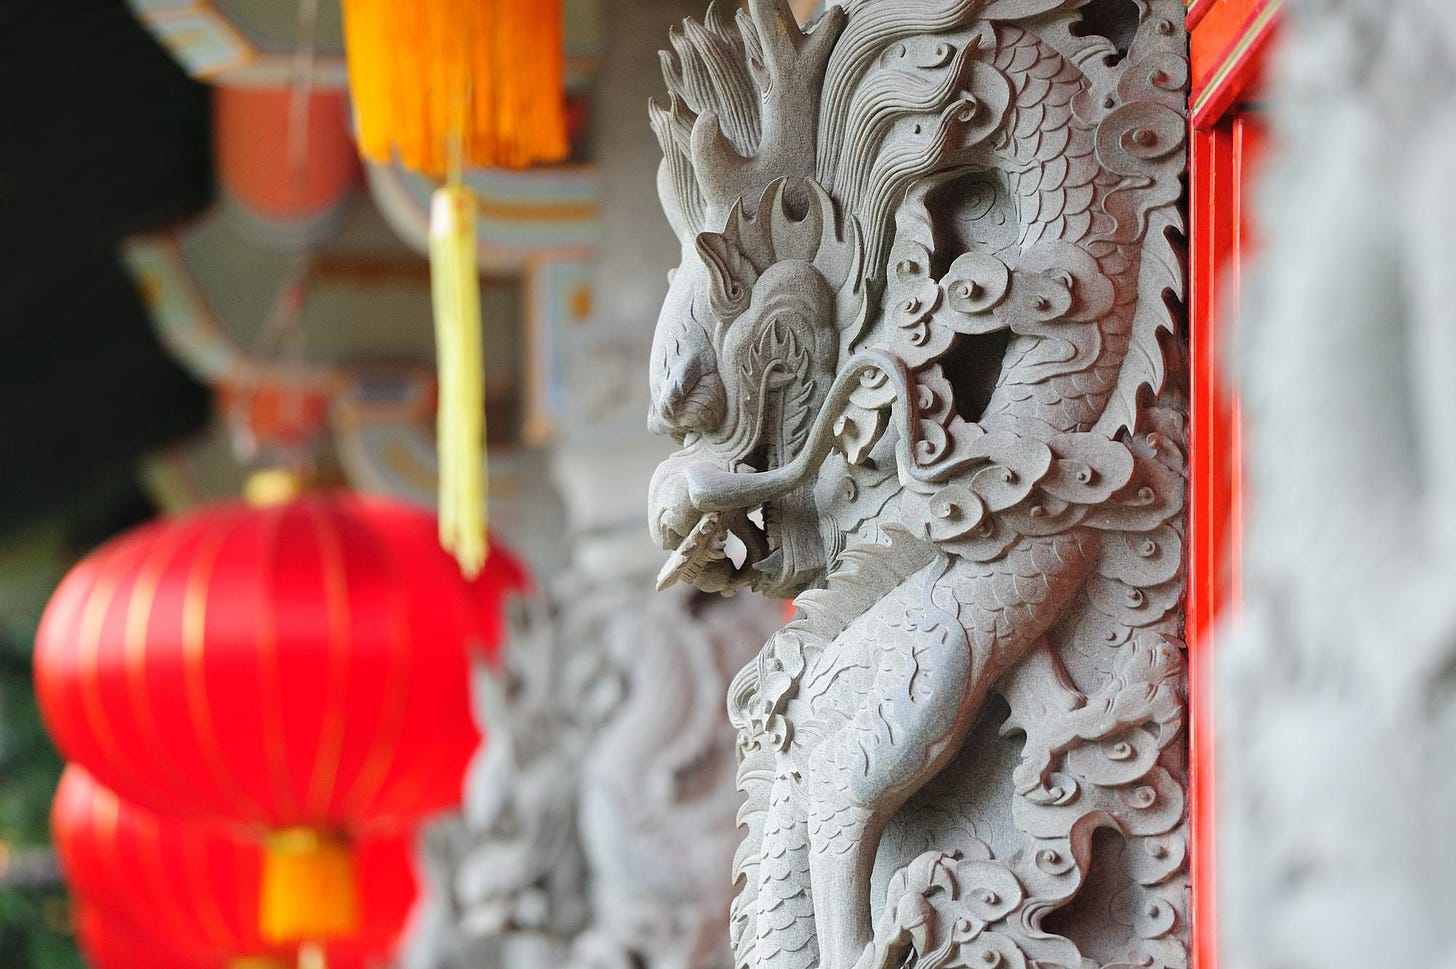 Dragon Statue - Image by TravelScape on Freepik